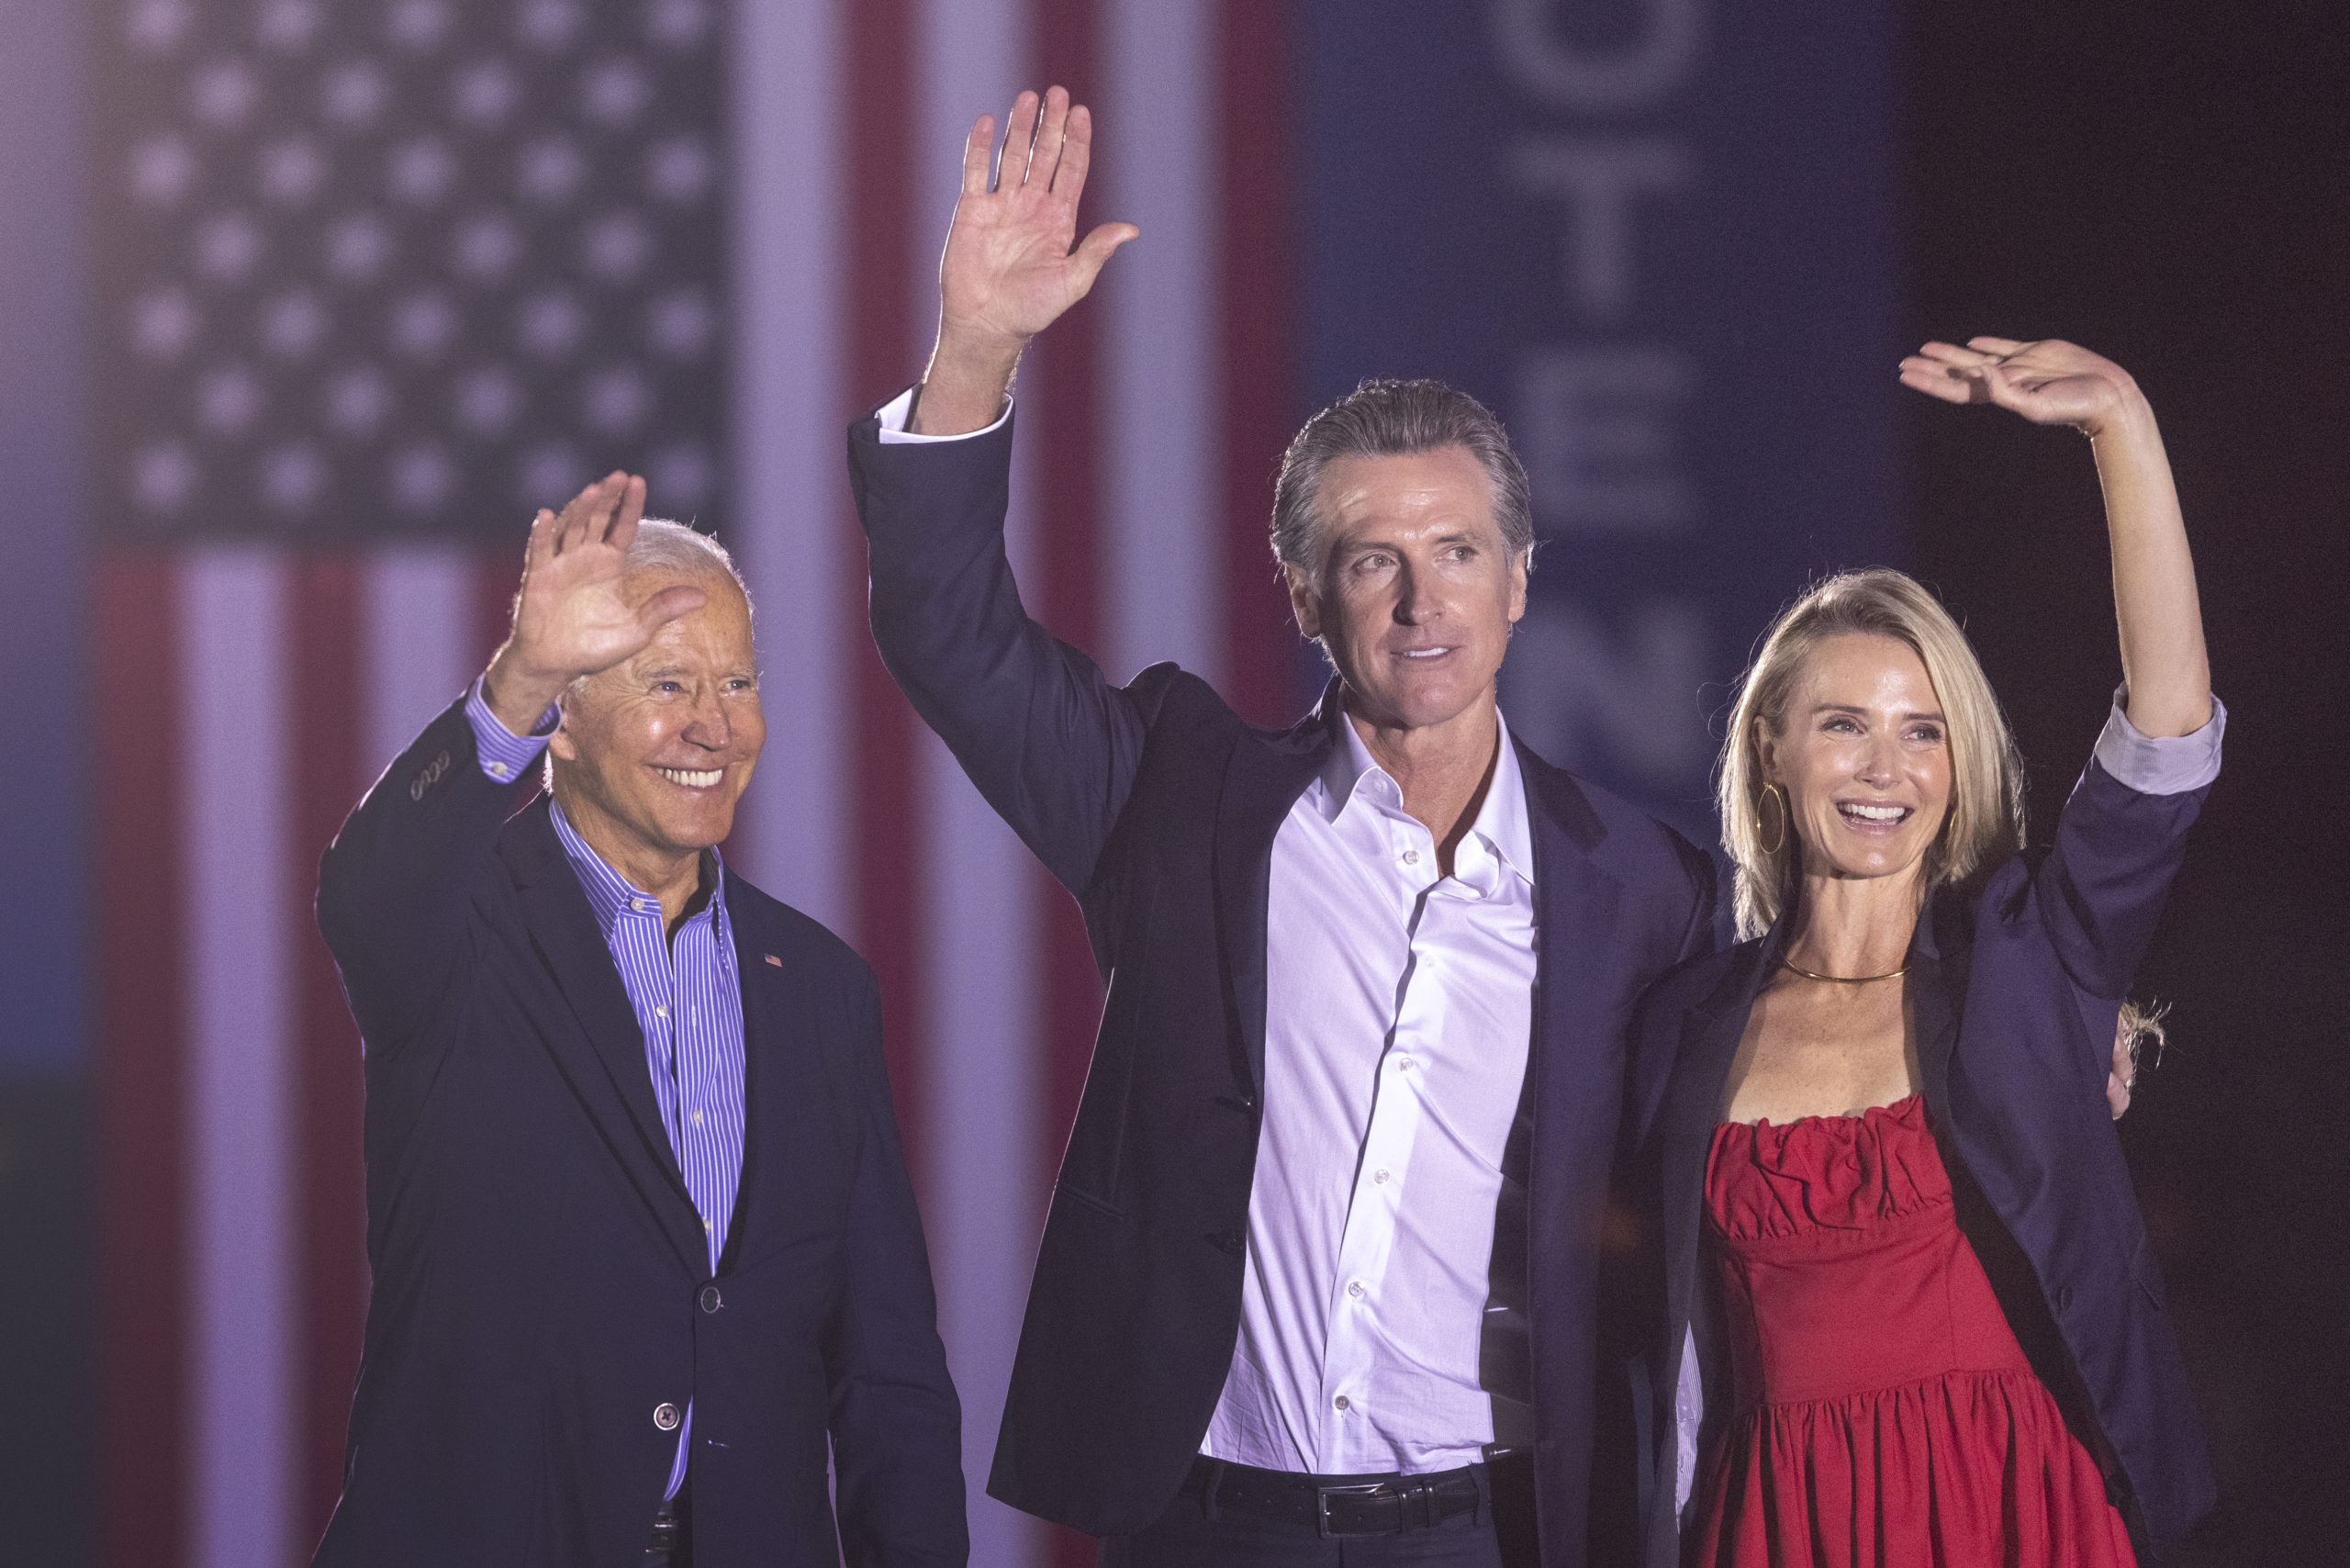 LONG BEACH, CA - SEPTEMBER 13: U.S. President Joe Biden, California Gov. Gavin Newsom and Jennifer Lynn Siebel Newsom wave to the crowd as they campaign to keep the governor in office at Long Beach City College on the eve of the last day of the special election to recall the governor on September 13, 2021 in Long Beach, California. Forty-six candidates, mostly Republicans, are attempting to overthrow the governor in the recall election a year ahead of the regularly scheduled gubernatorial vote. (Photo by David McNew/Getty Images)